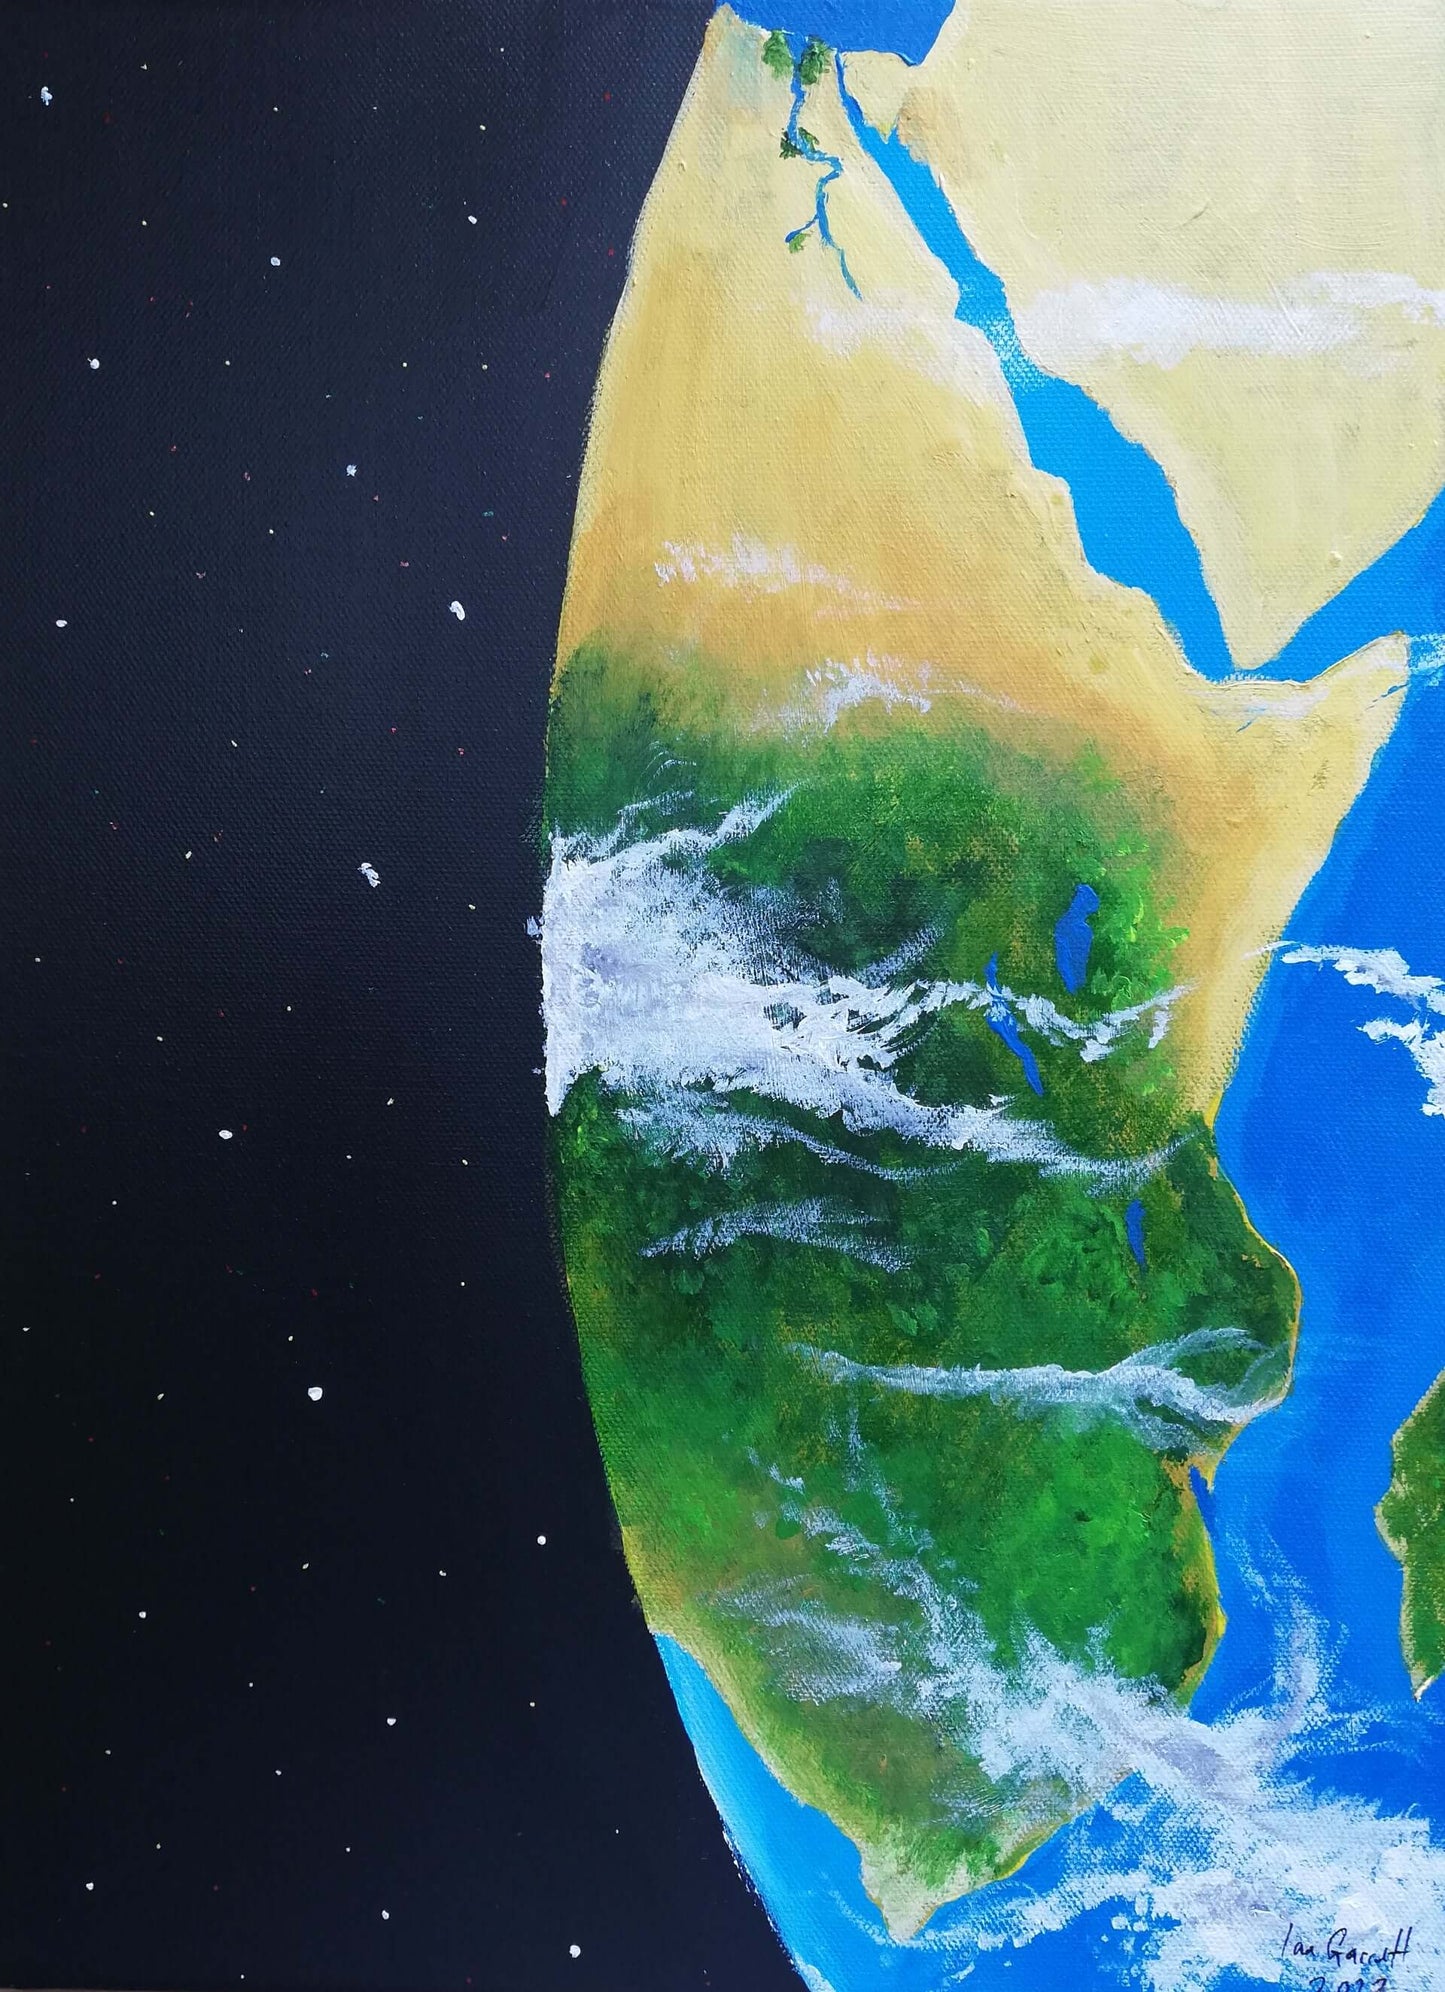 Africa and the Middle East seen from Space, ©Ian Garrett 2022. Acrylic on Canvas 20 x 16 inches.